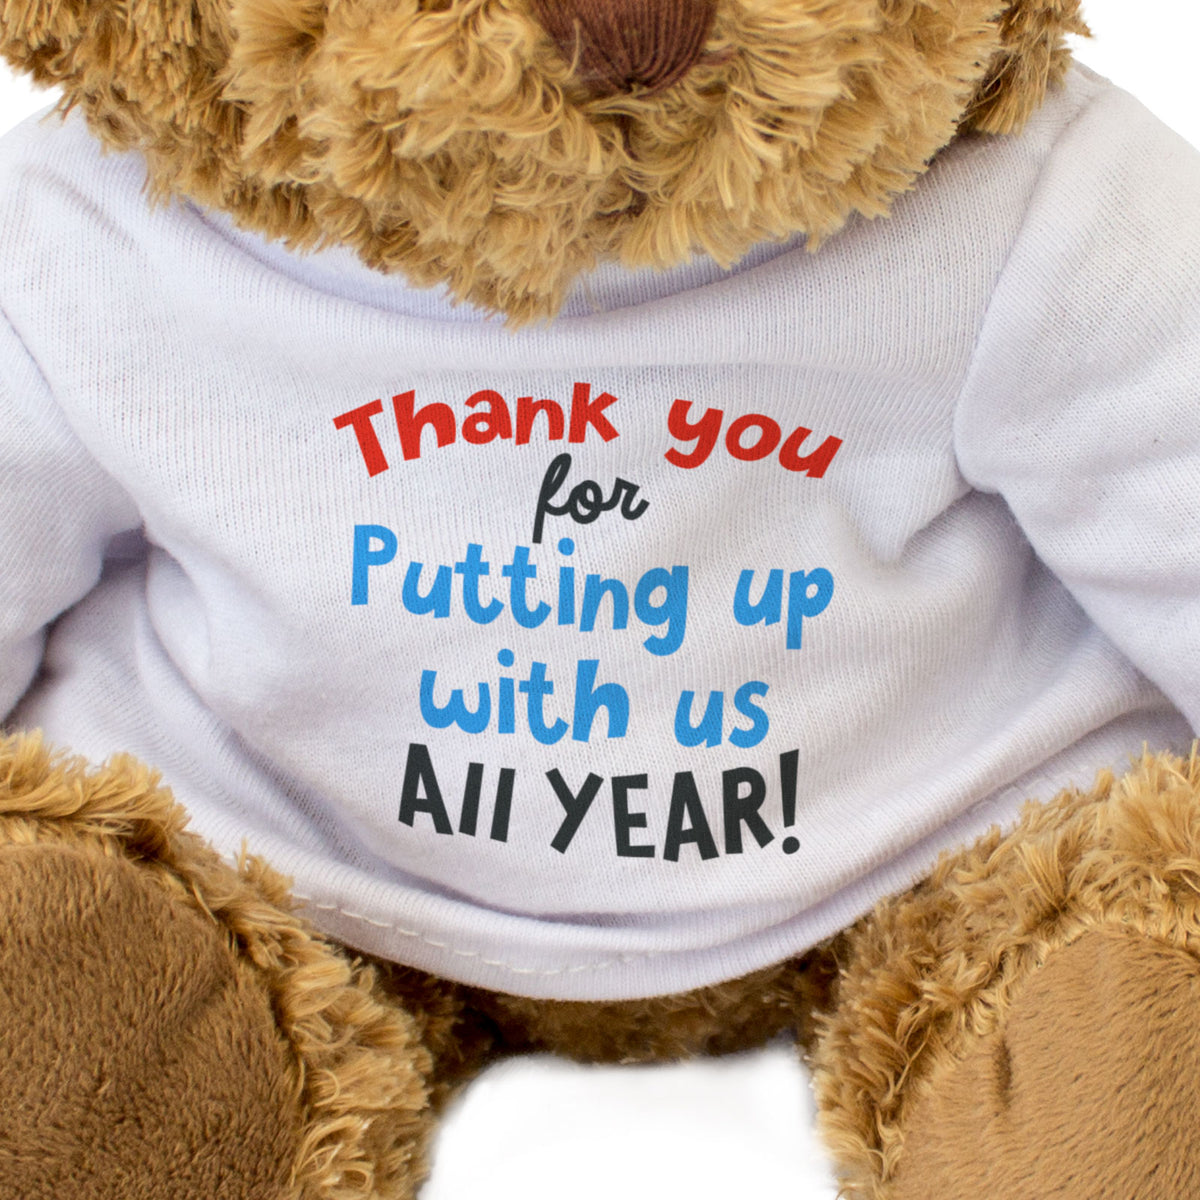 Thank You For Putting Up With Us All Year! - Teddy Bear